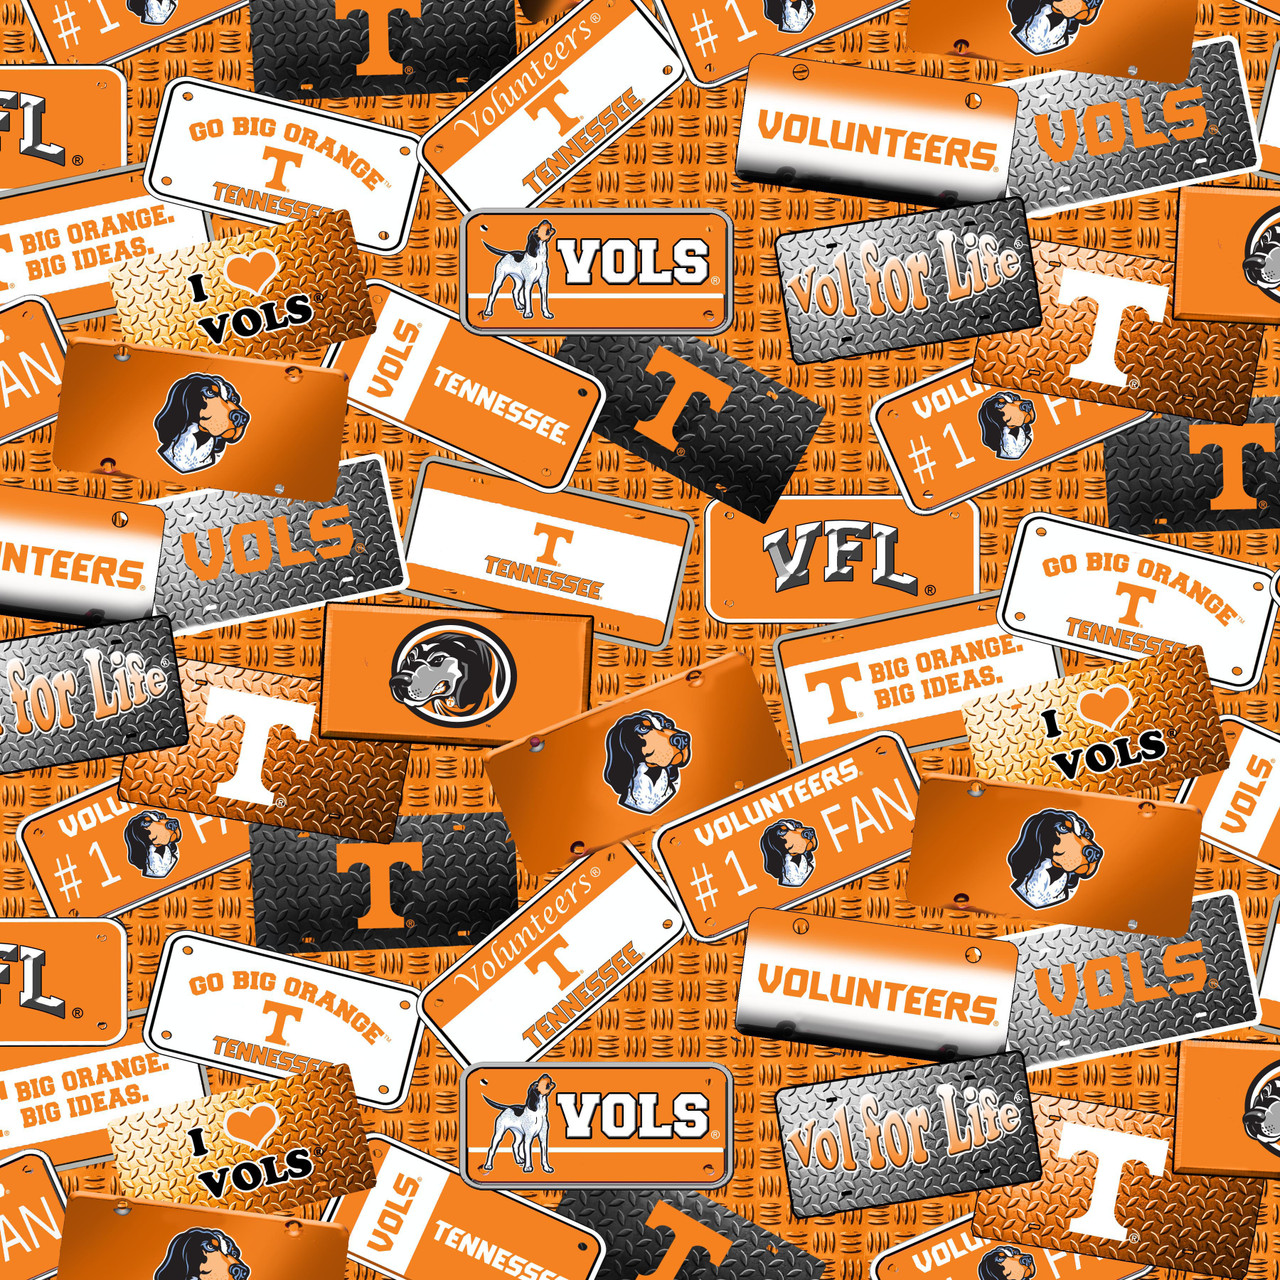 University of Tennessee Volunteers Cotton Fabric with License Plate Print and Matching Solid Cotton Fabrics